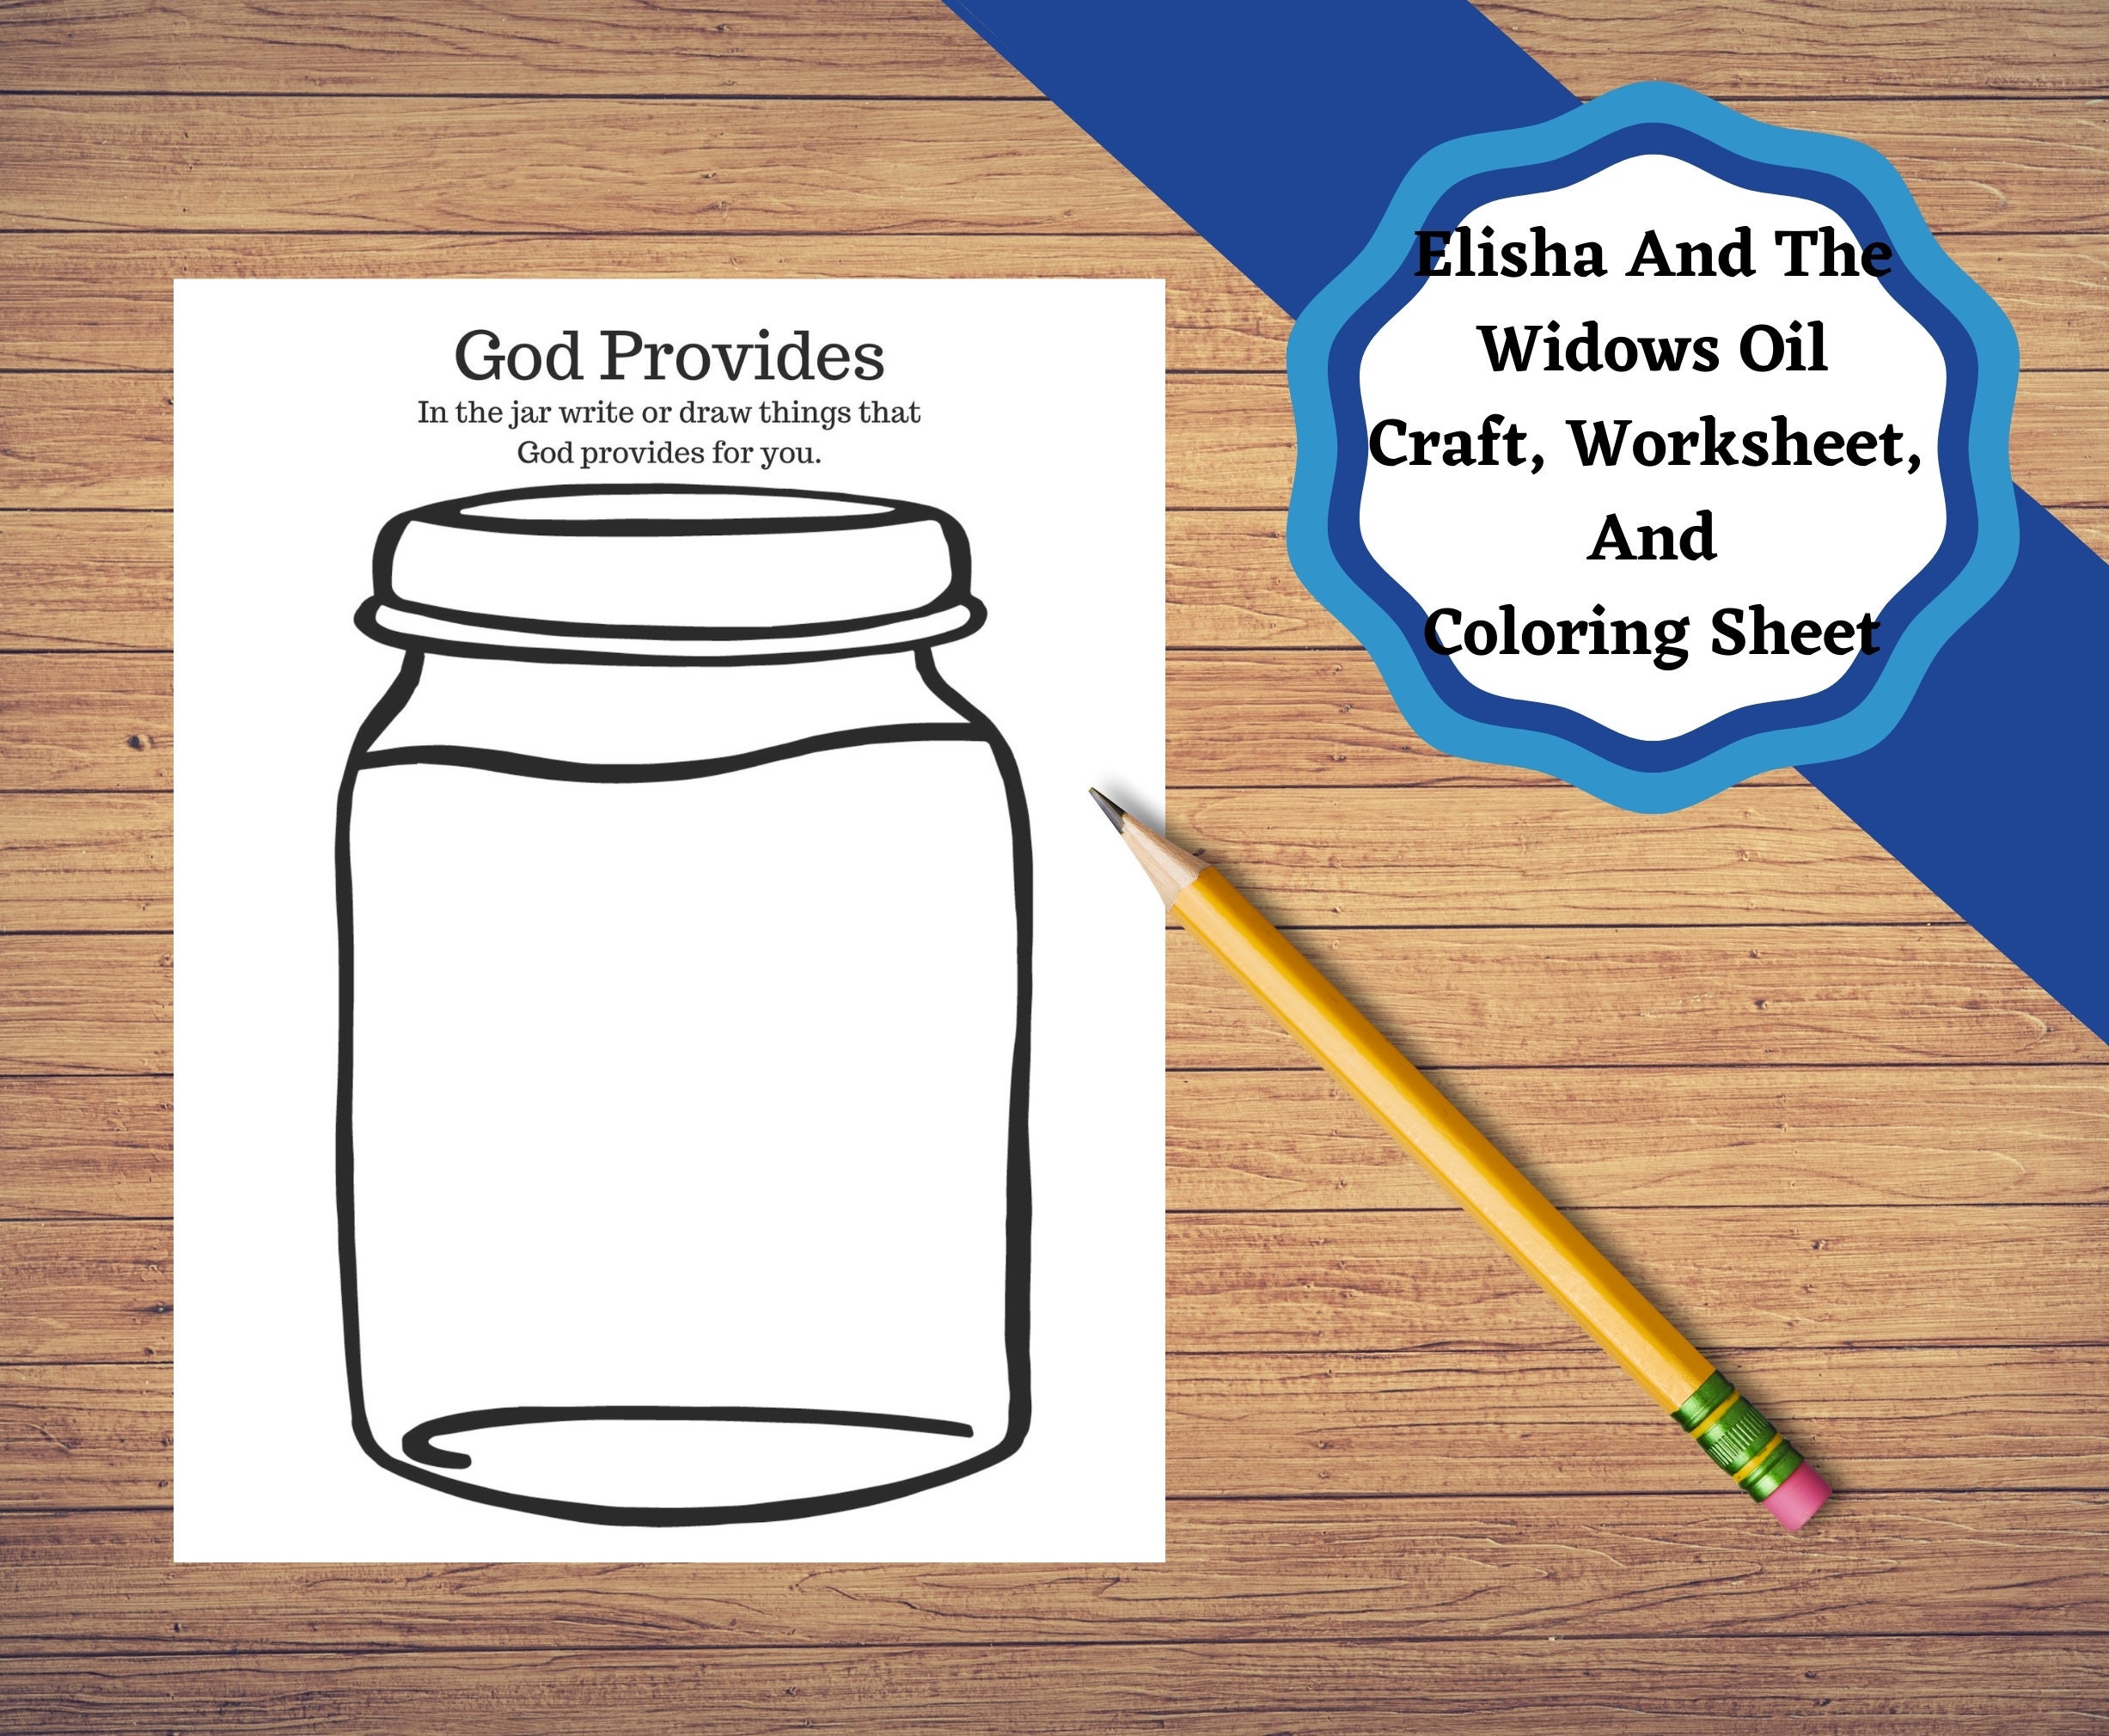 Elisha and the widows oil printable bible story pages craft and coloring page